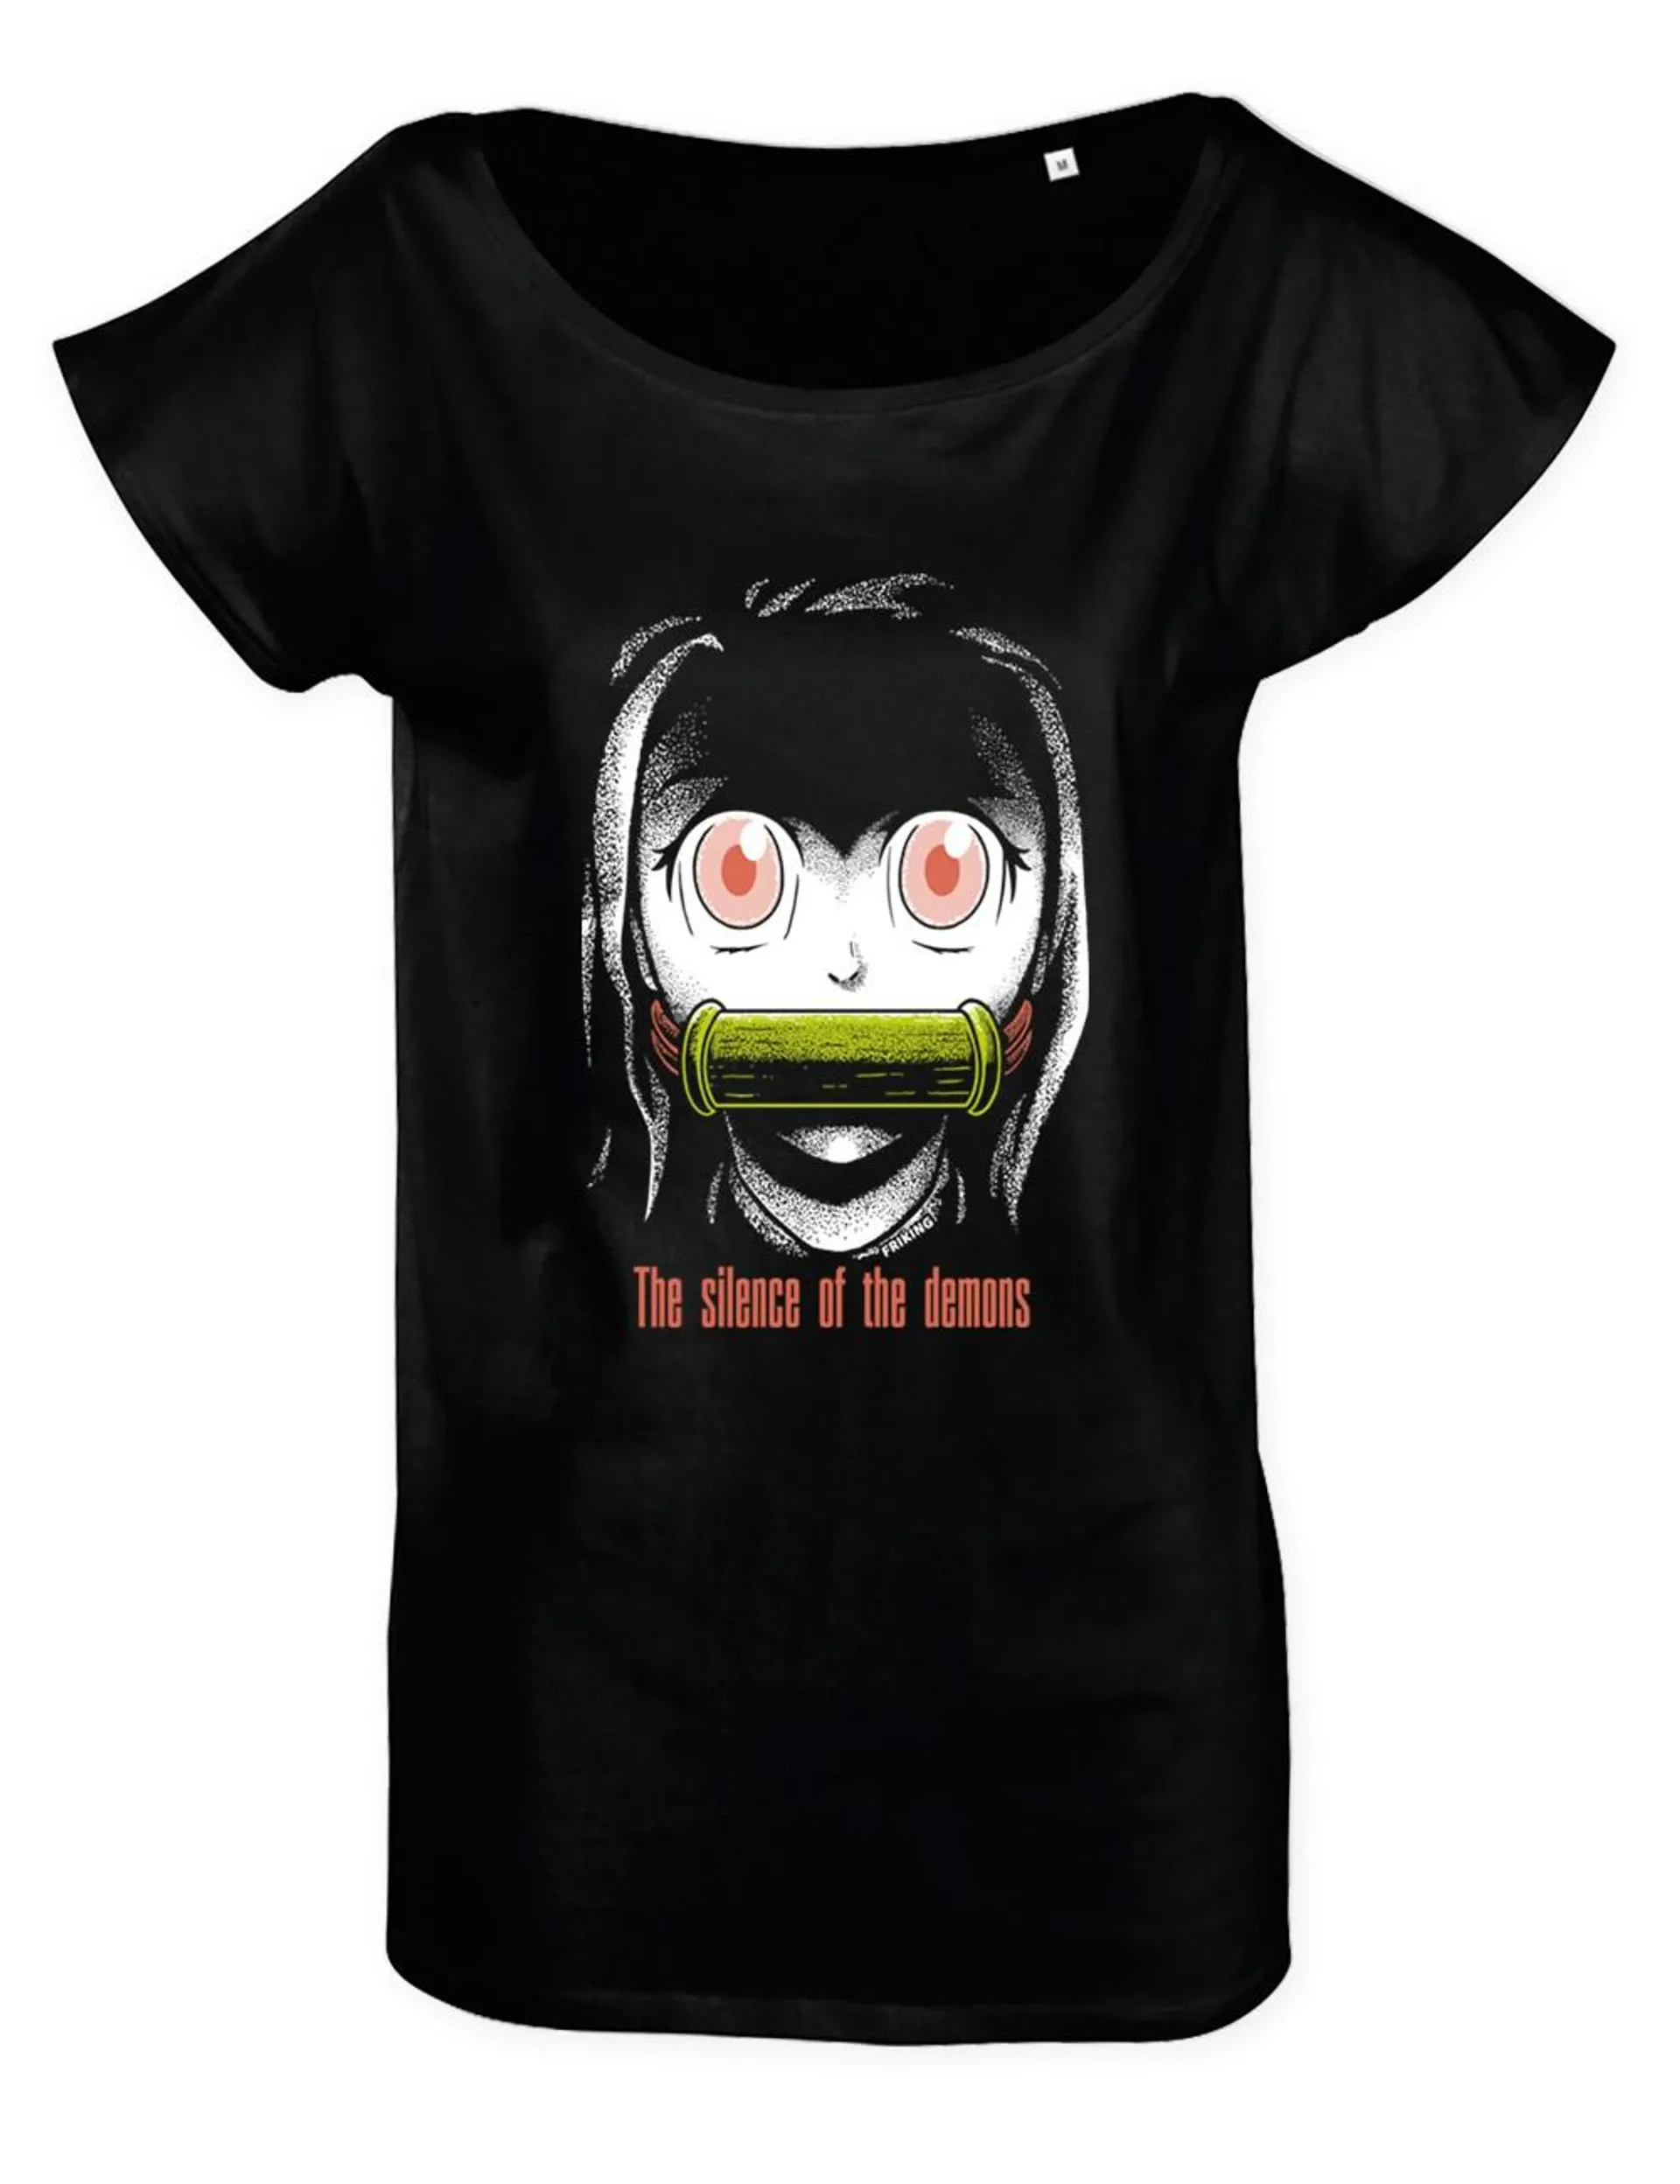 CAMISETA MUJER NEW YORK The silence of the demons